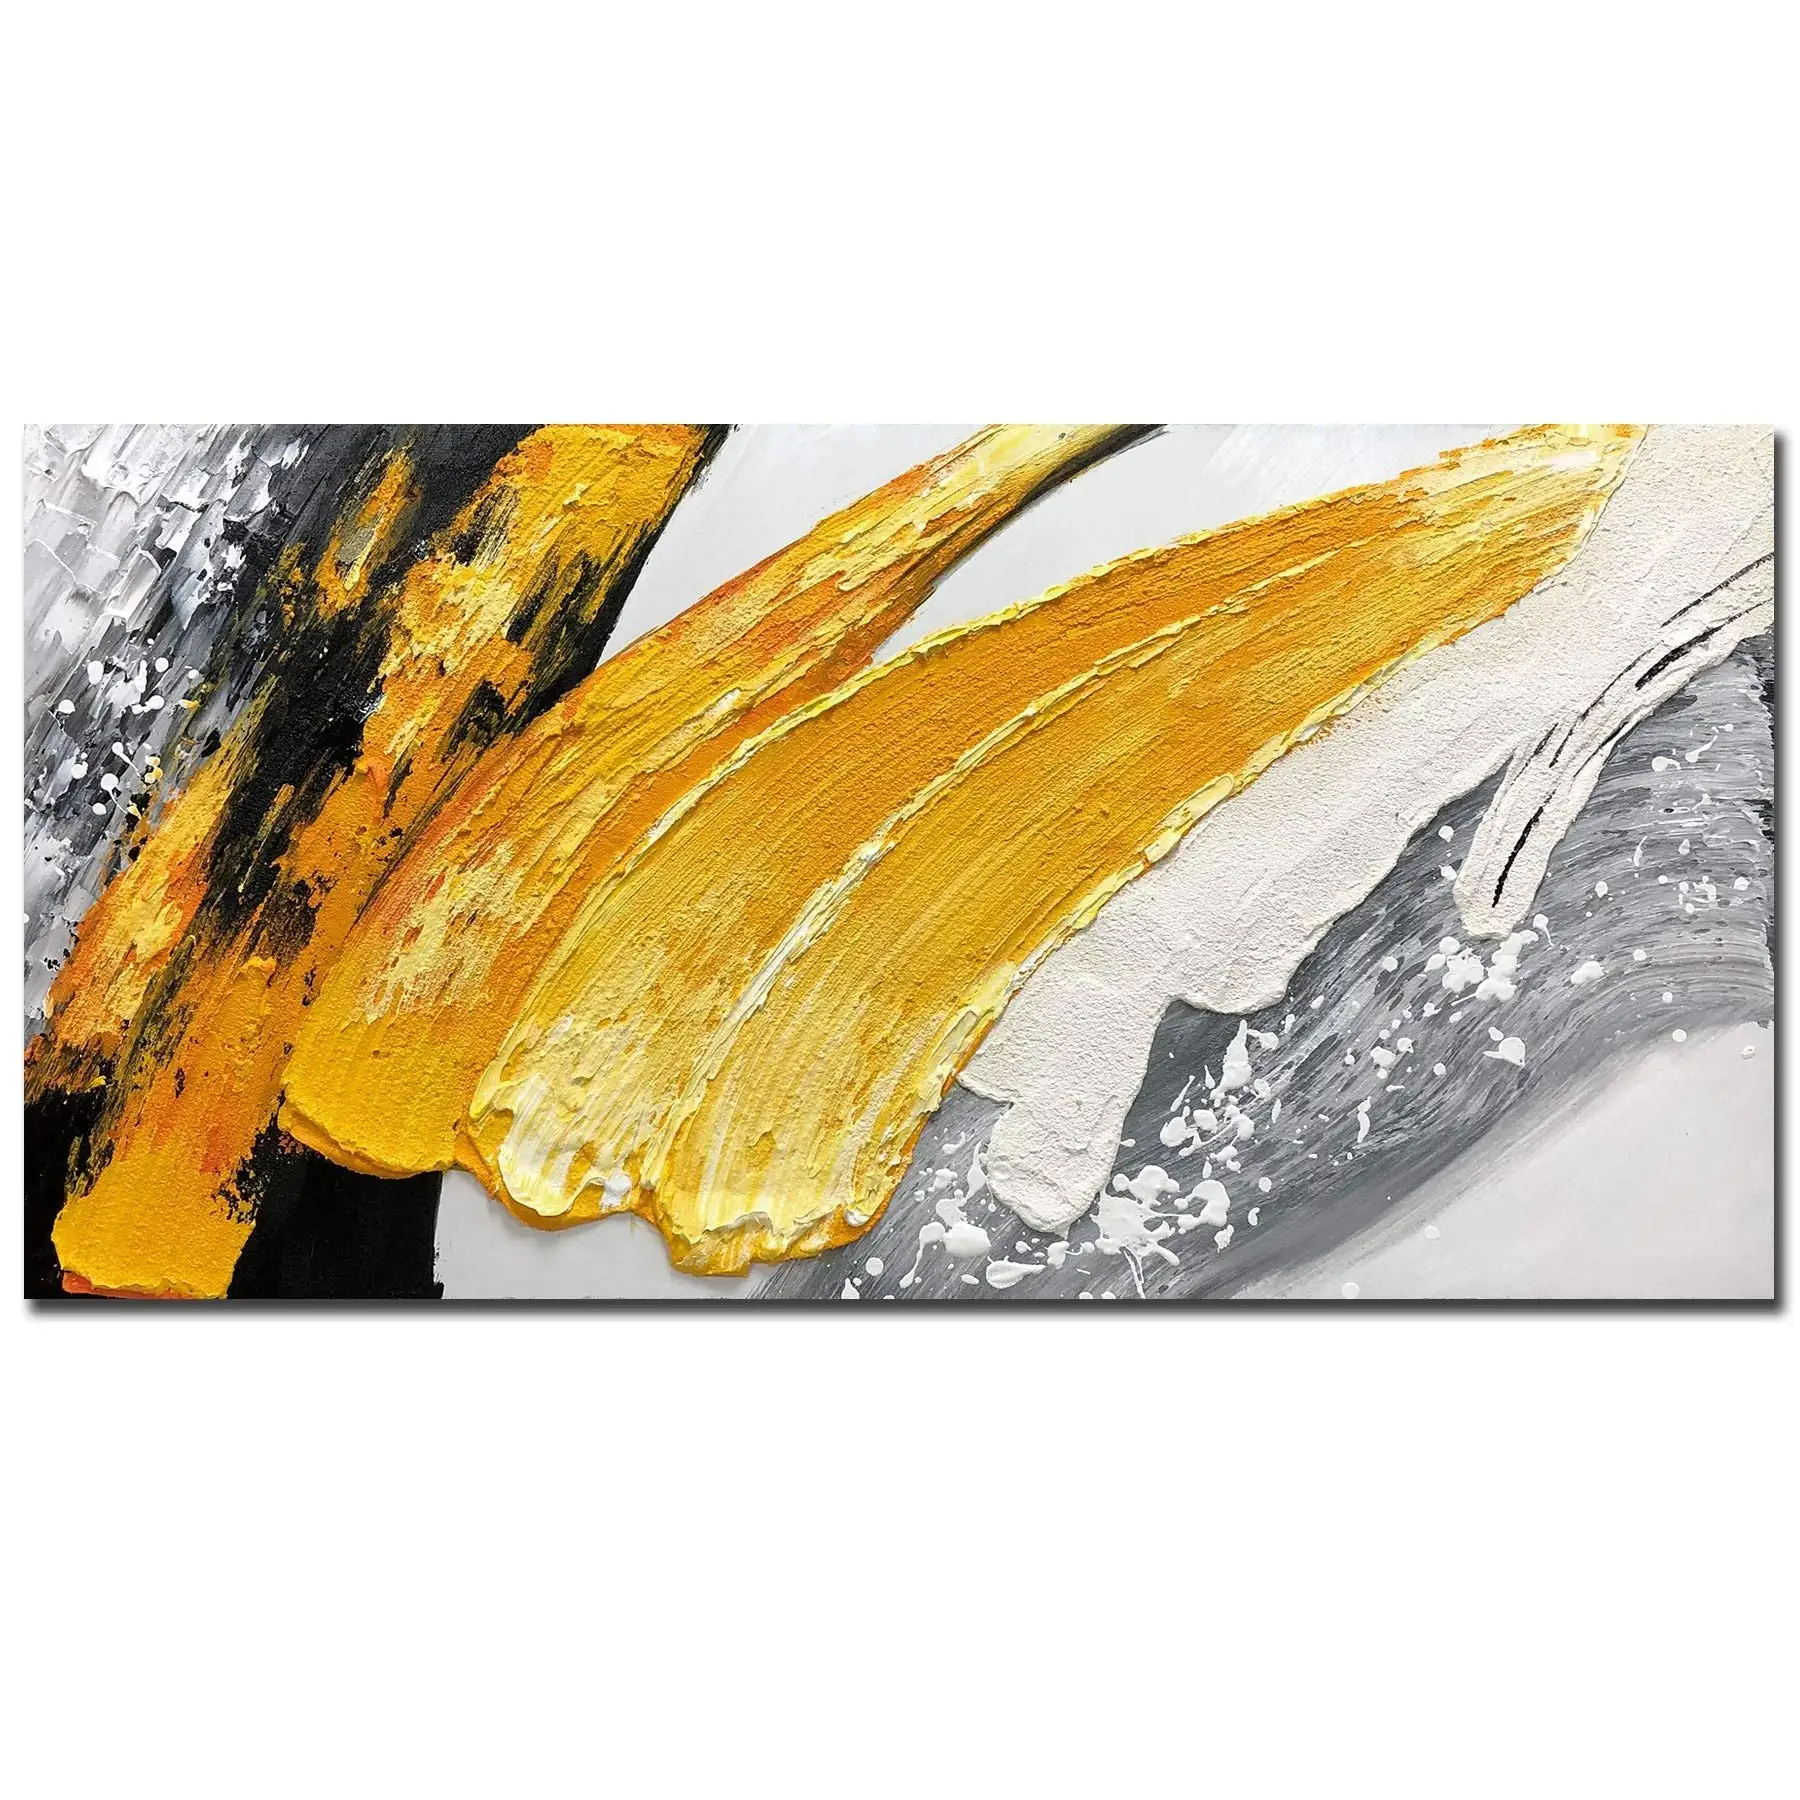 

Hand Painted 3D Textured Abstract Yellow Black White Oil Painting Modern Wall Art Contemporary Artwork Home Decoration No Framed